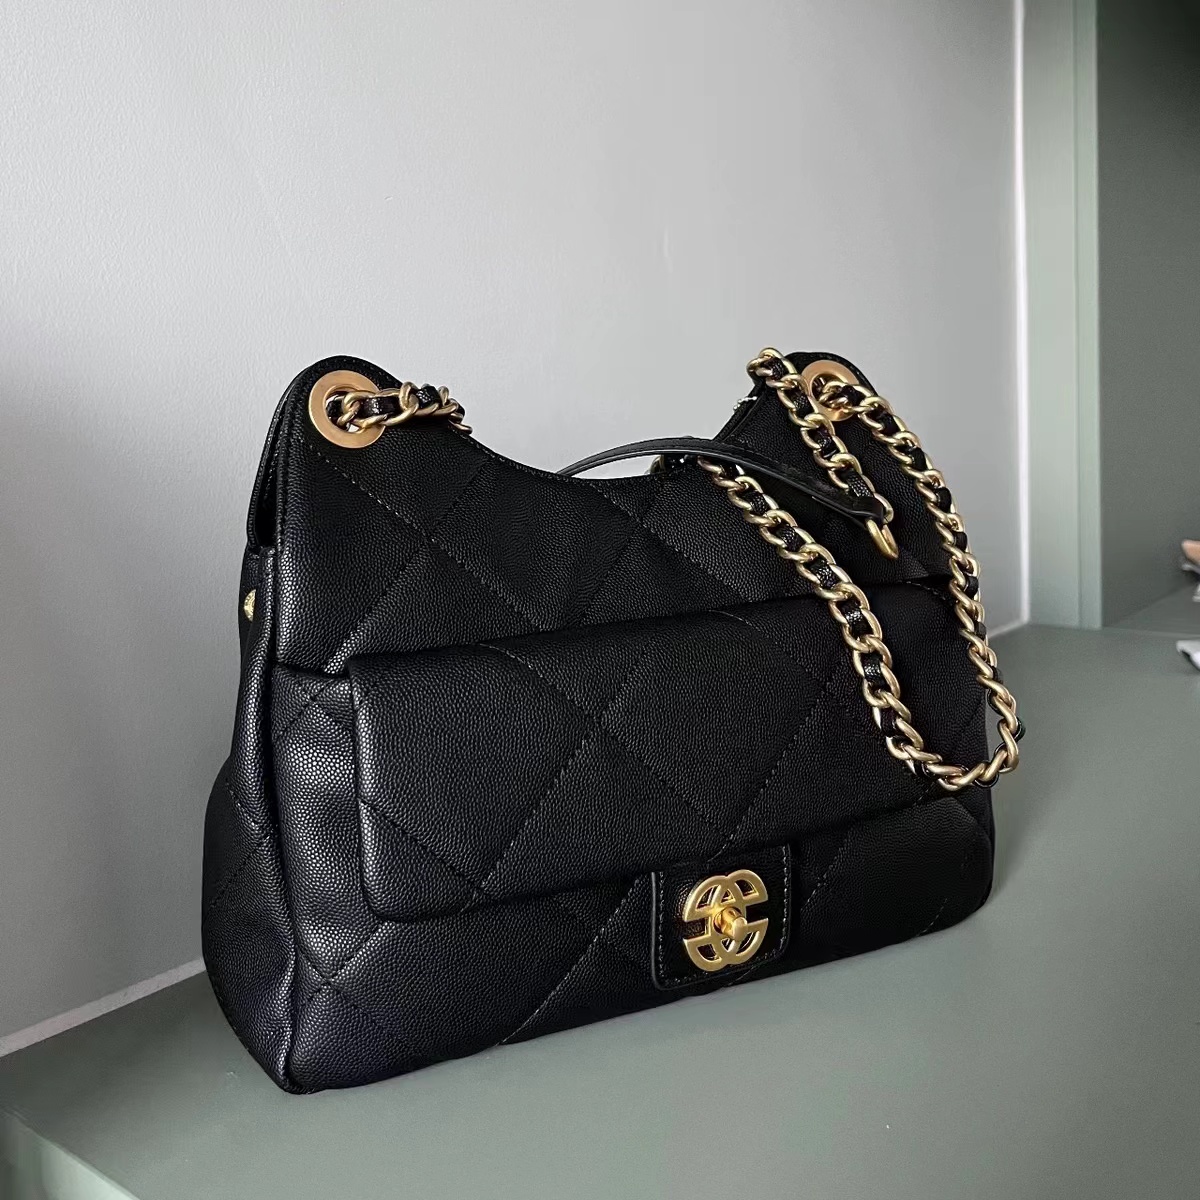 Women's Quilted Black Leather Lock Buckle Crossbody Chain Shoulder Bag photo review